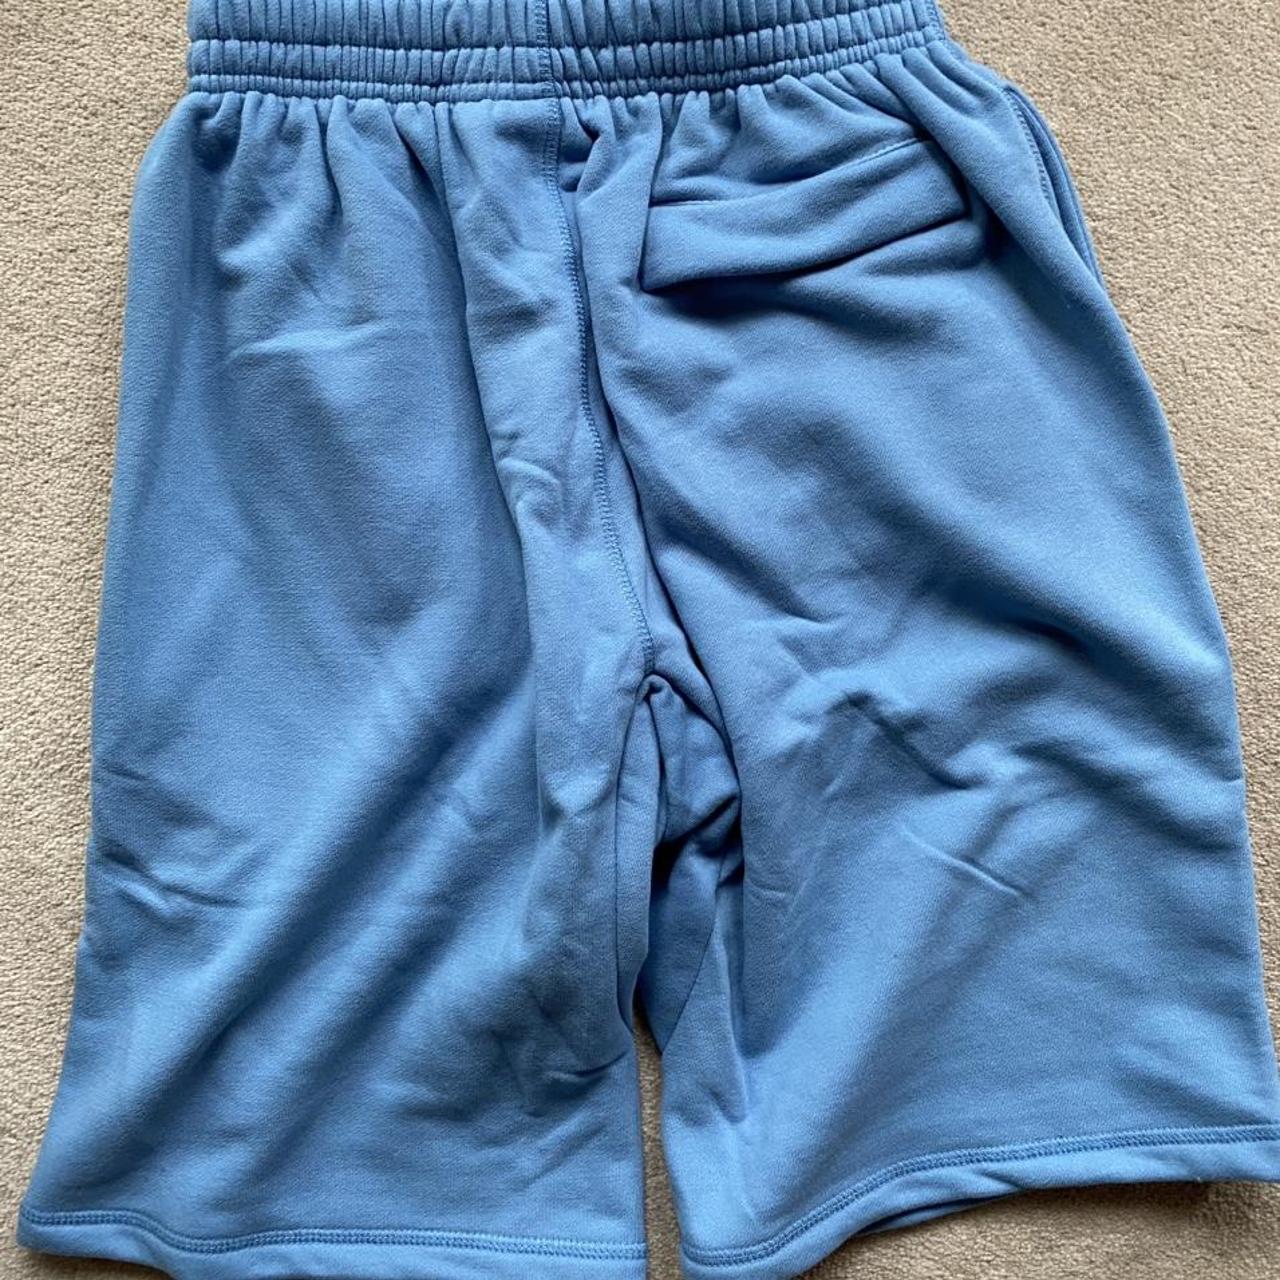 Corteiz baby blue shorts 📏 SMALL BRAND NEW with... - Depop